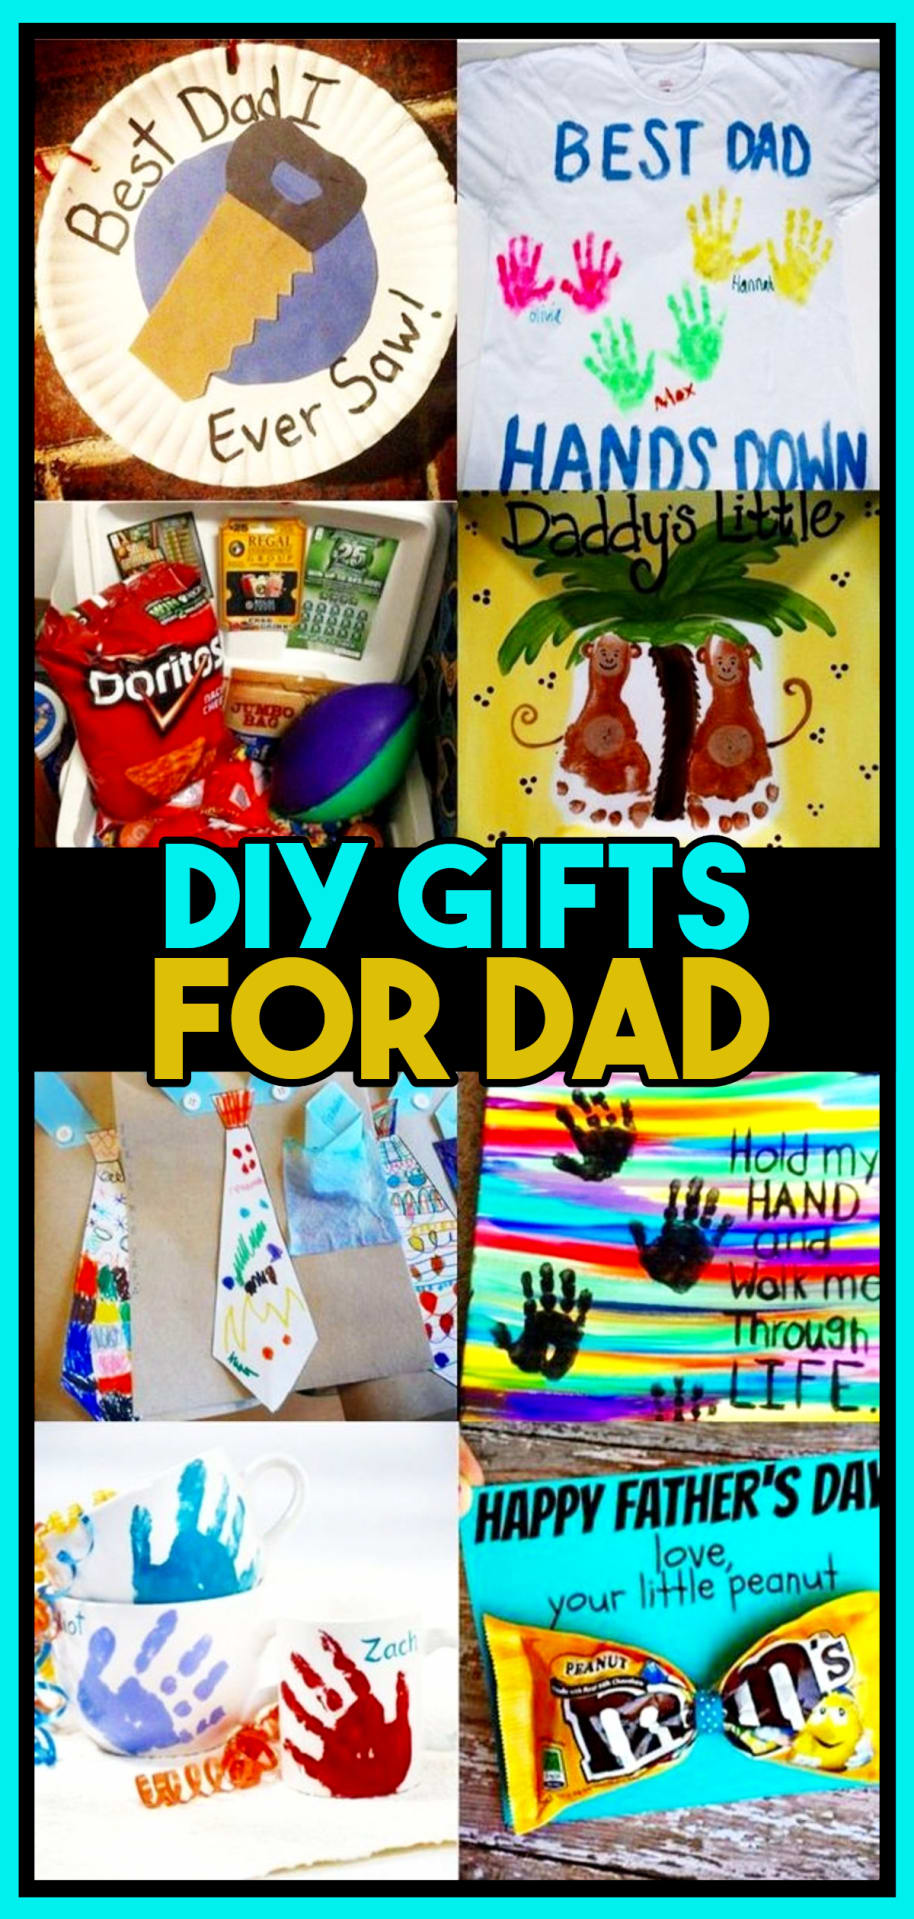 Homemade gifts for dad from kids from daughter or from son - such awesome and EASY homemade DIY gifts for dad